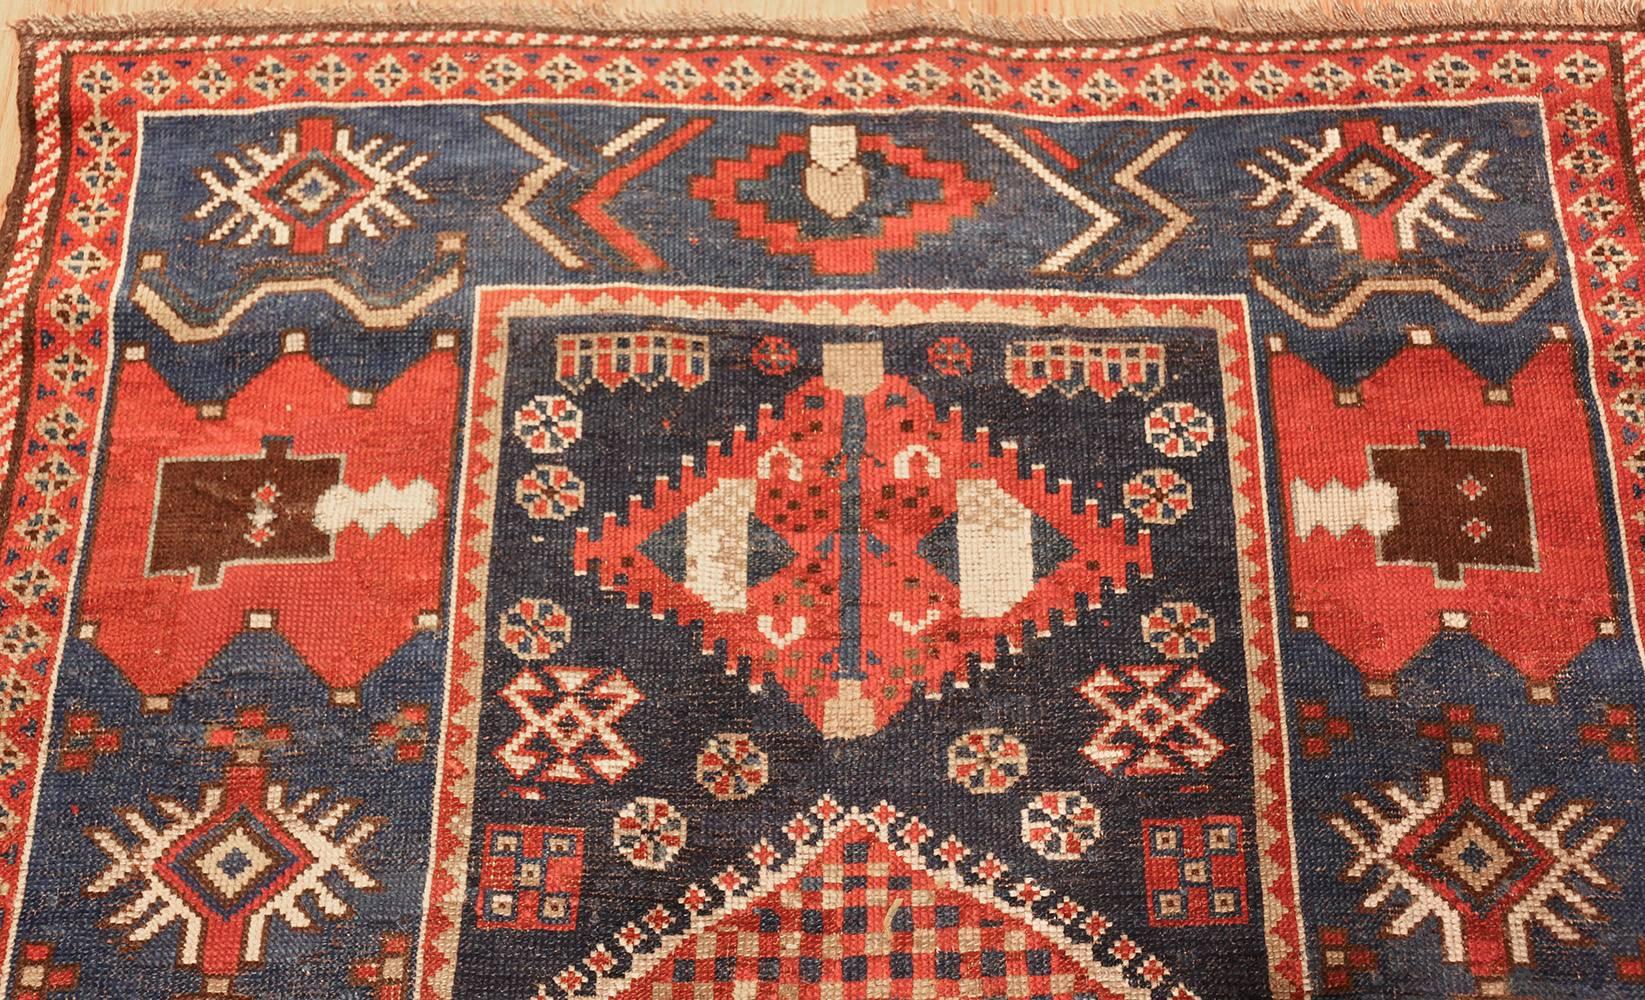 Hand-Knotted Small Antique Caucasian Kazak Rug